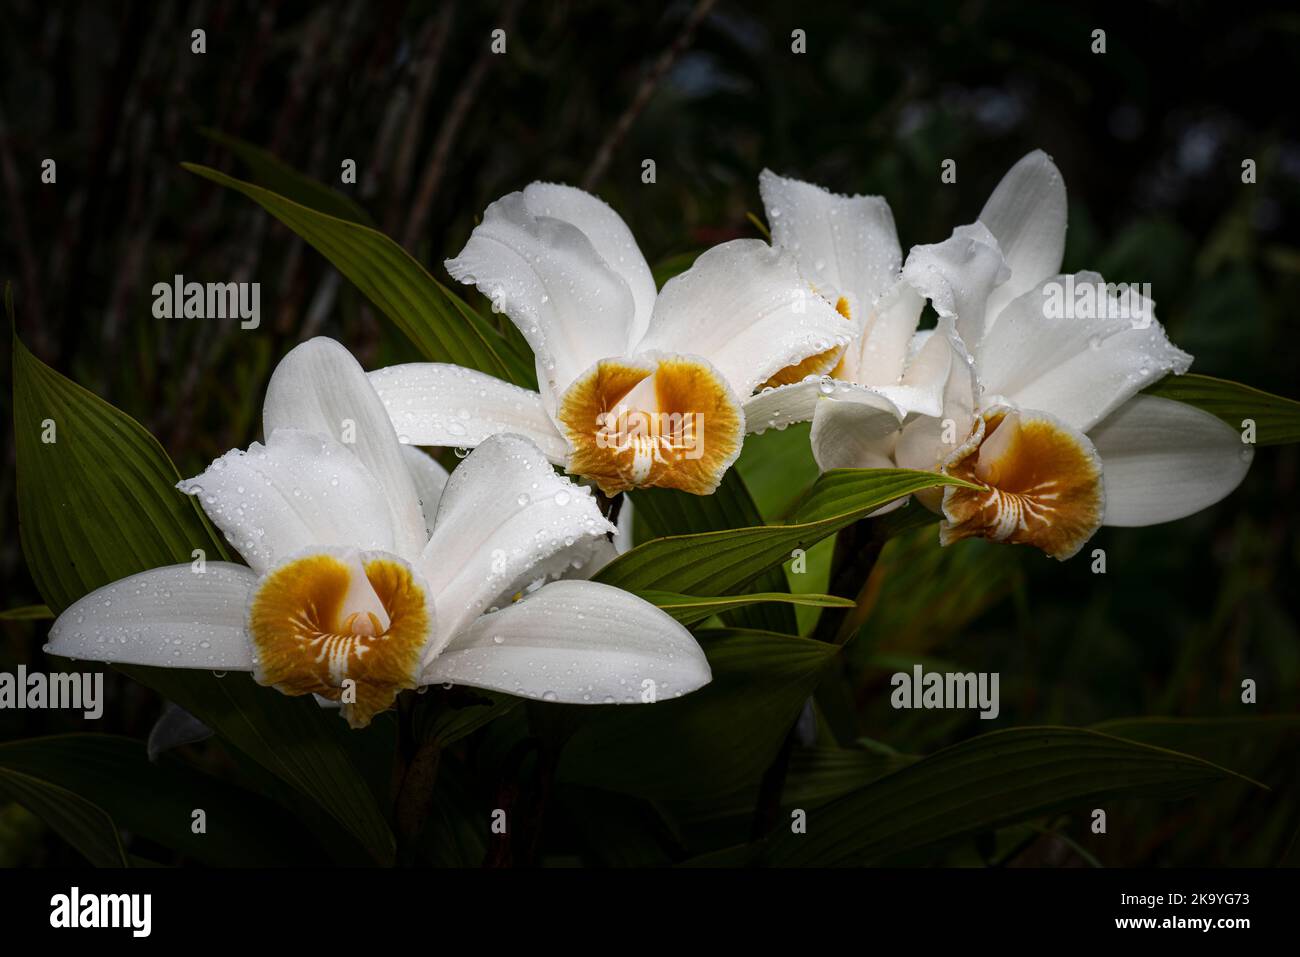 3 White sobralia orchids with flowerrs in full bloom images taken in Panamas cloud forest Stock Photo